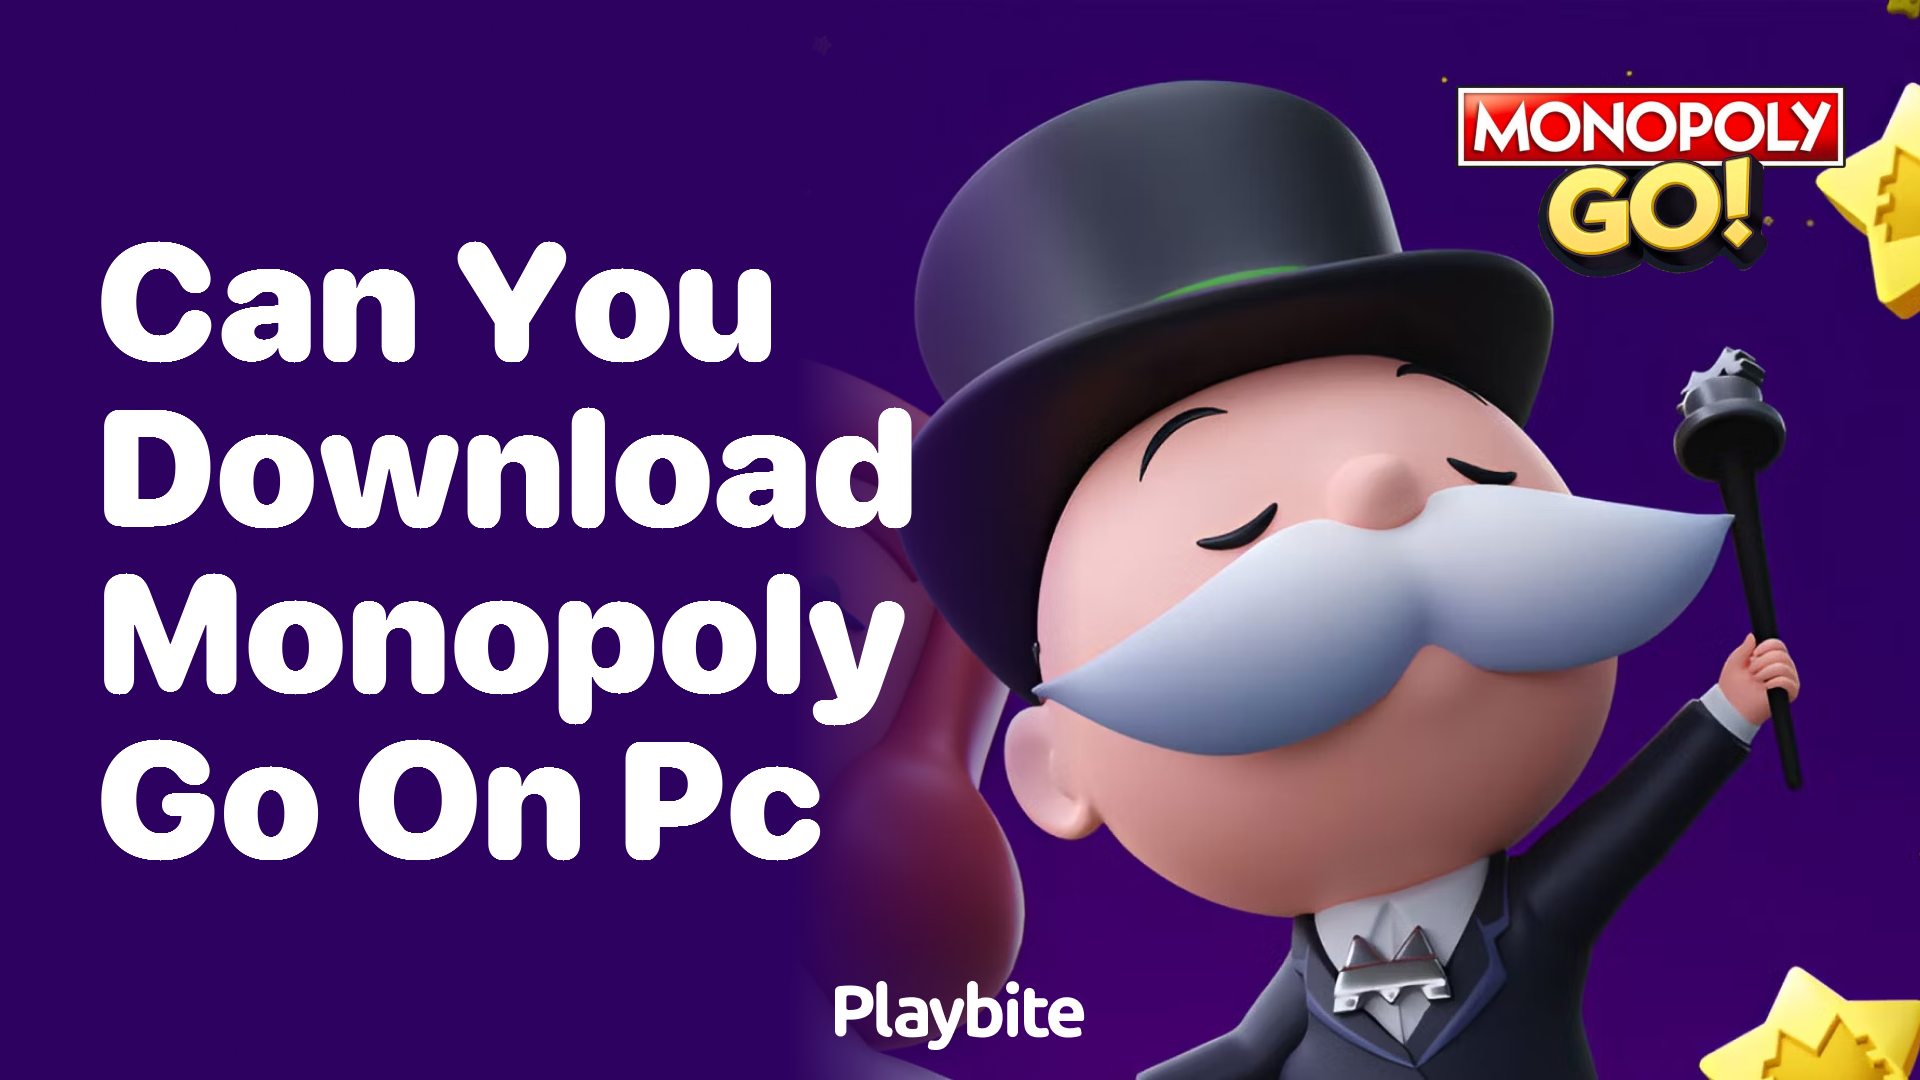 Can You Download Monopoly Go on PC? Find Out Here!